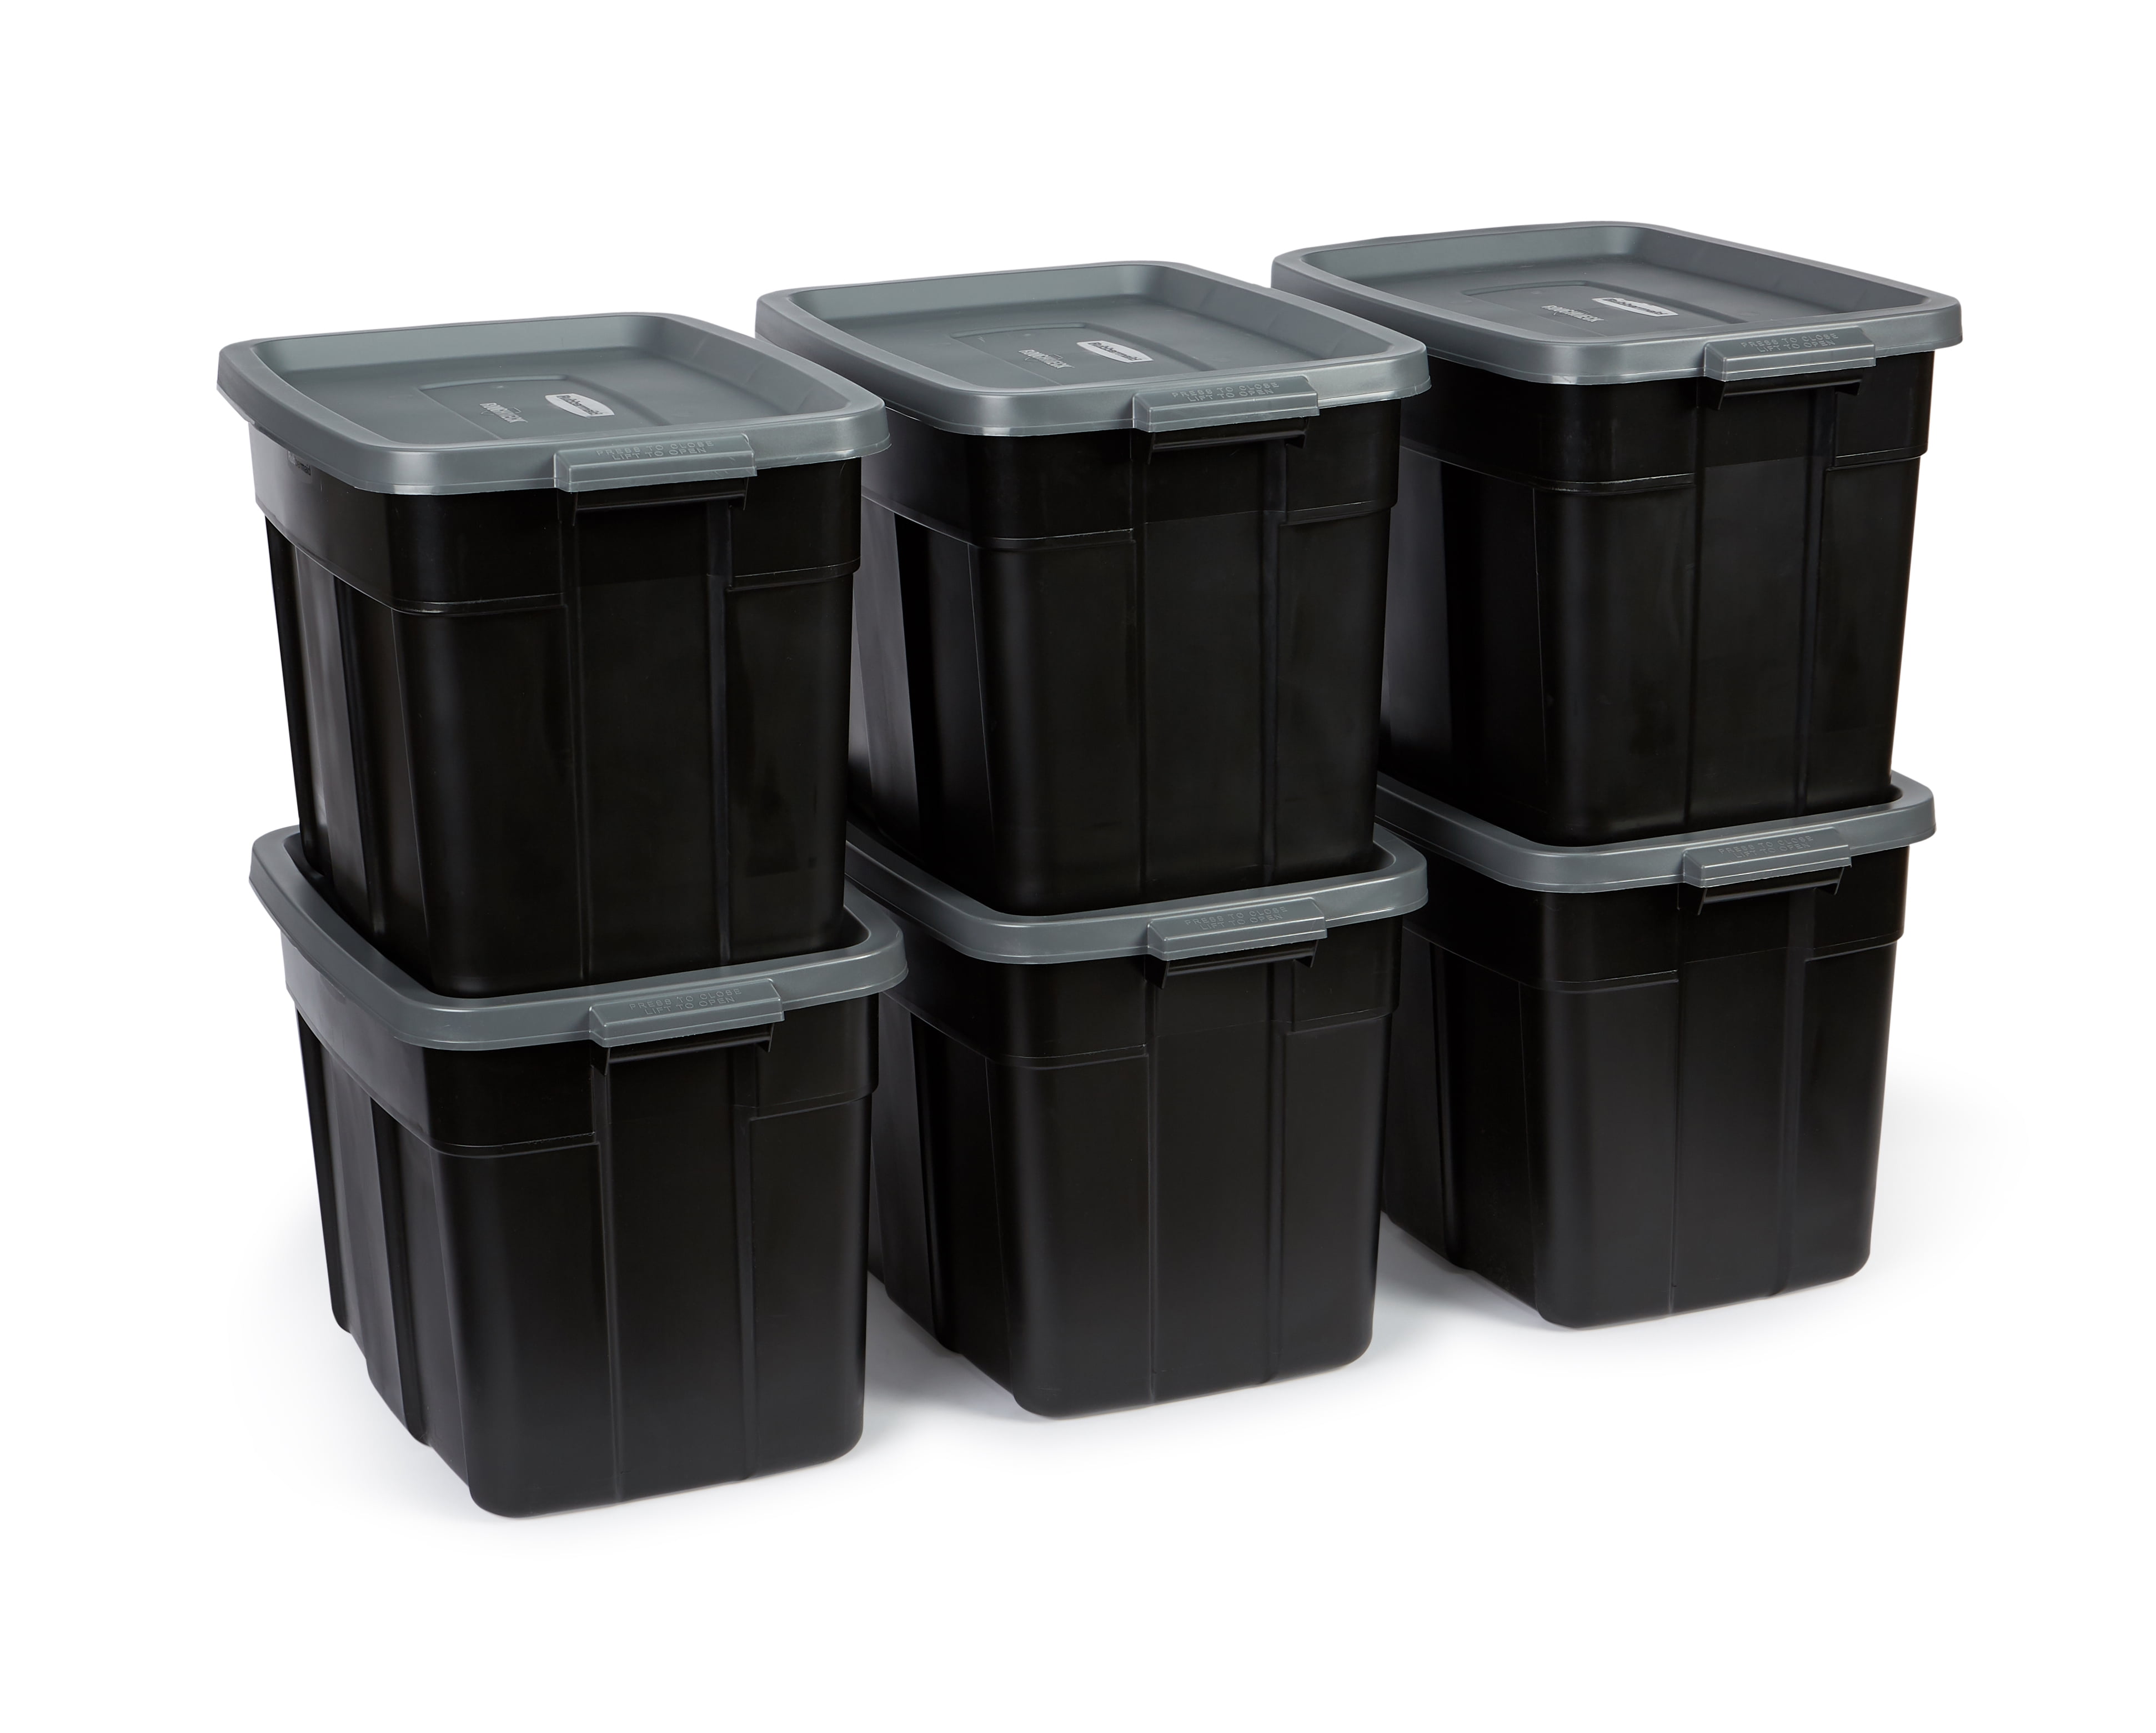 Rubbermaid Roughneck Tote 10 Gal Storage Container, Black/Gray (6 Pack) 